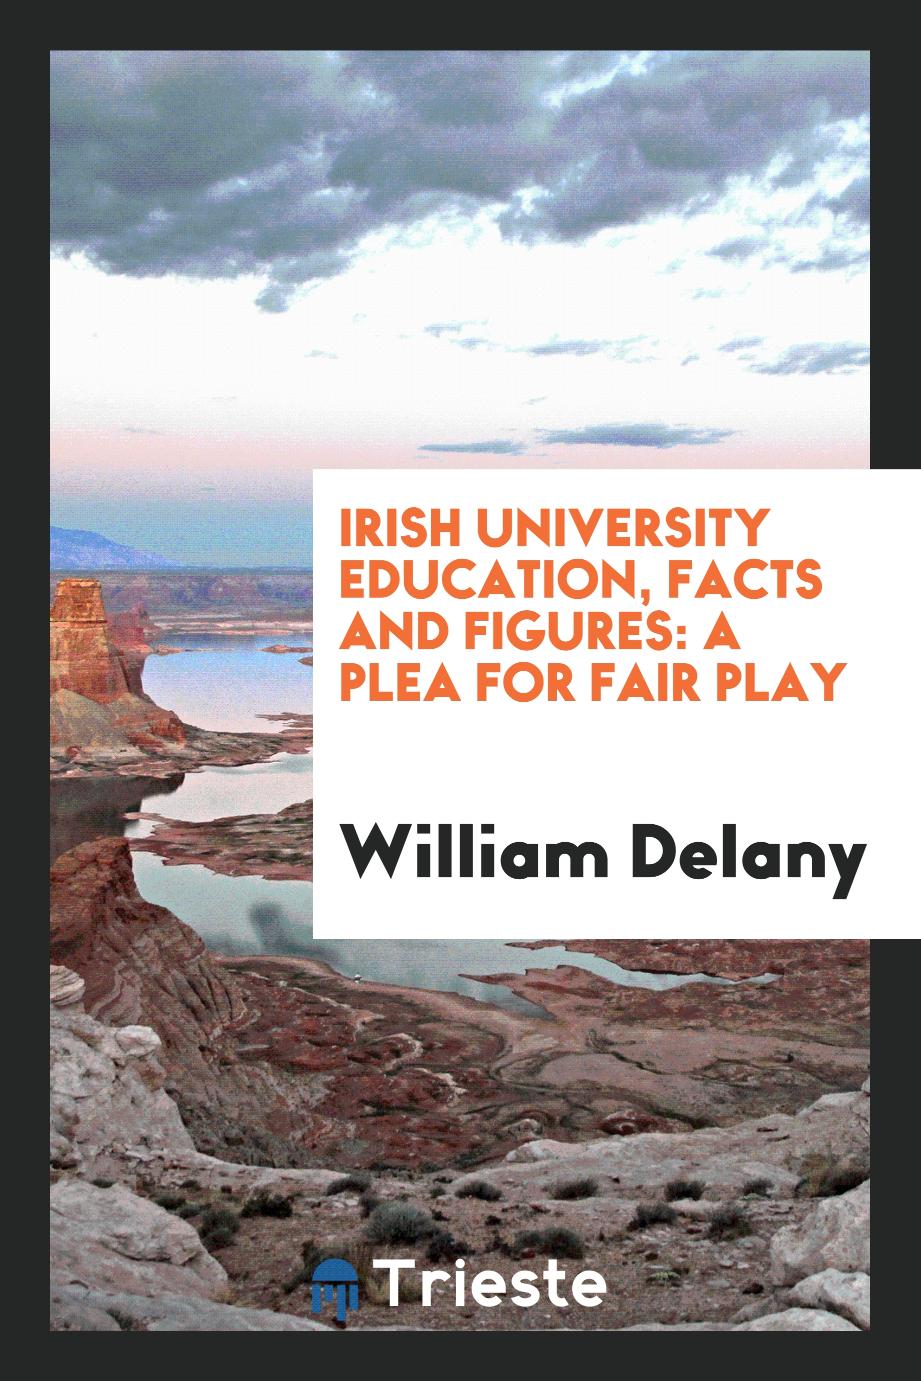 Irish University Education, Facts and Figures: A Plea for Fair Play